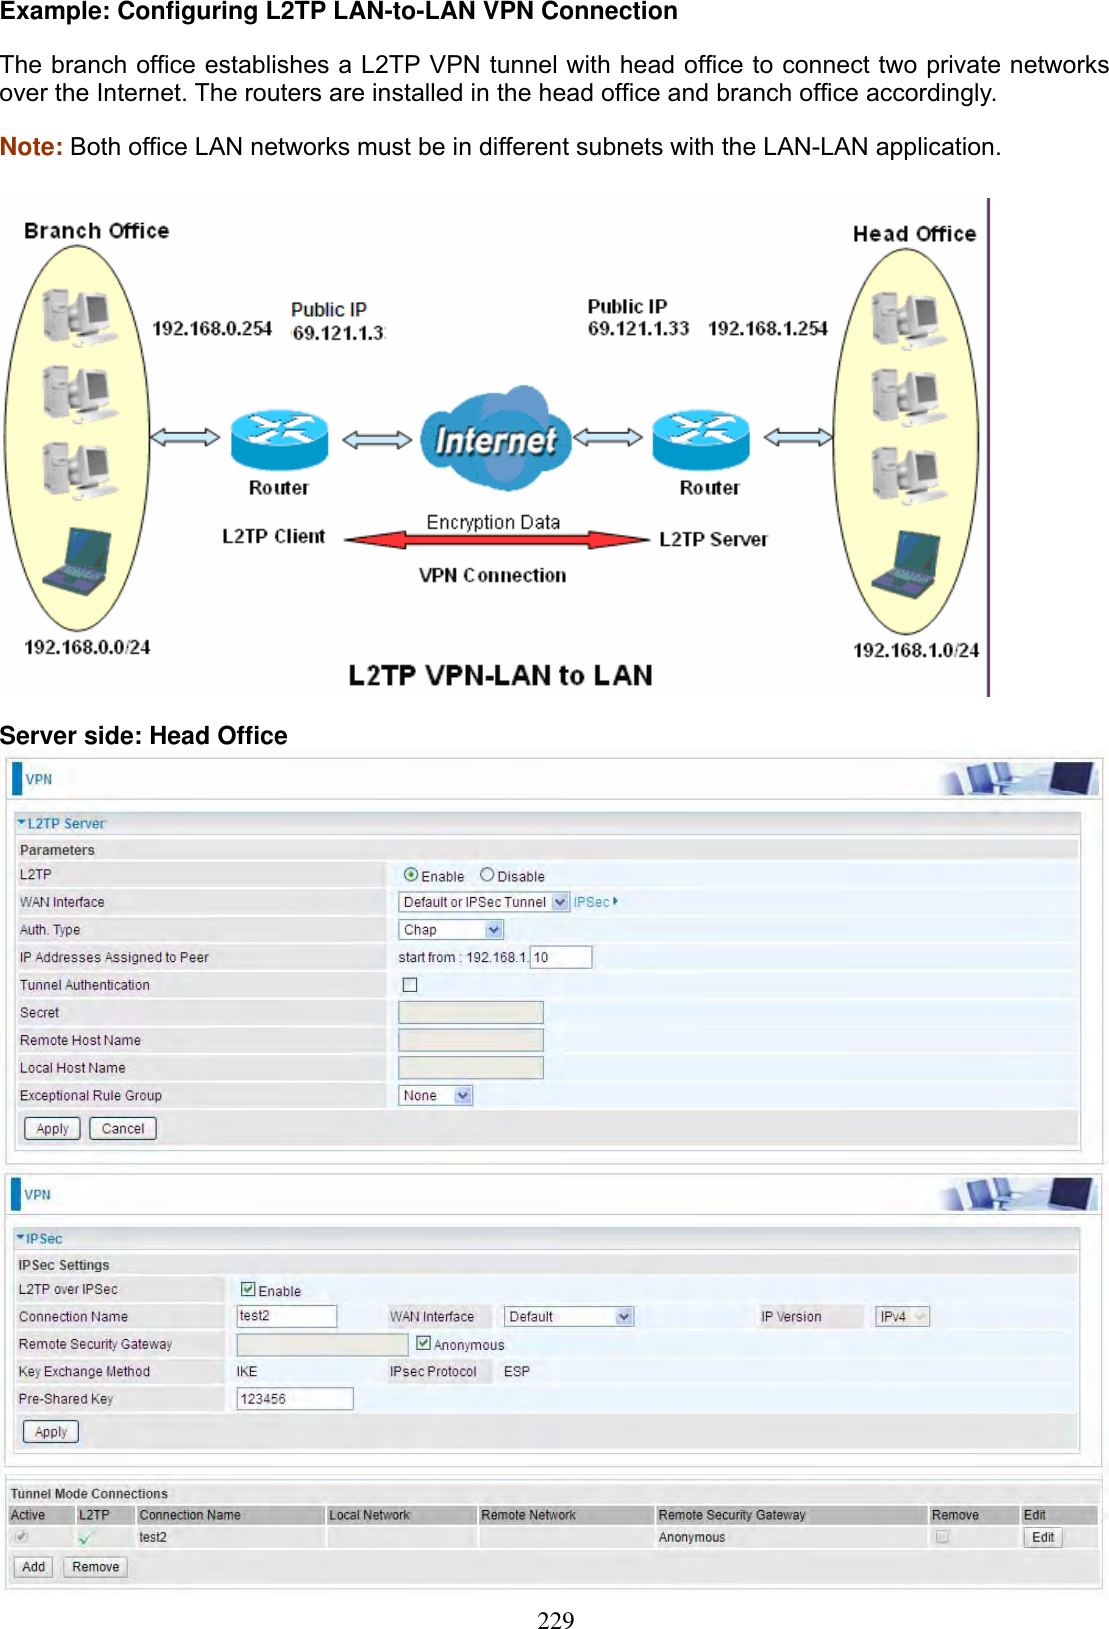 229Example: Configuring L2TP LAN-to-LAN VPN ConnectionThe branch office establishes a L2TP VPN tunnel with head office to connect two private networks over the Internet. The routers are installed in the head office and branch office accordingly. Note: Both office LAN networks must be in different subnets with the LAN-LAN application. Server side: Head Office 